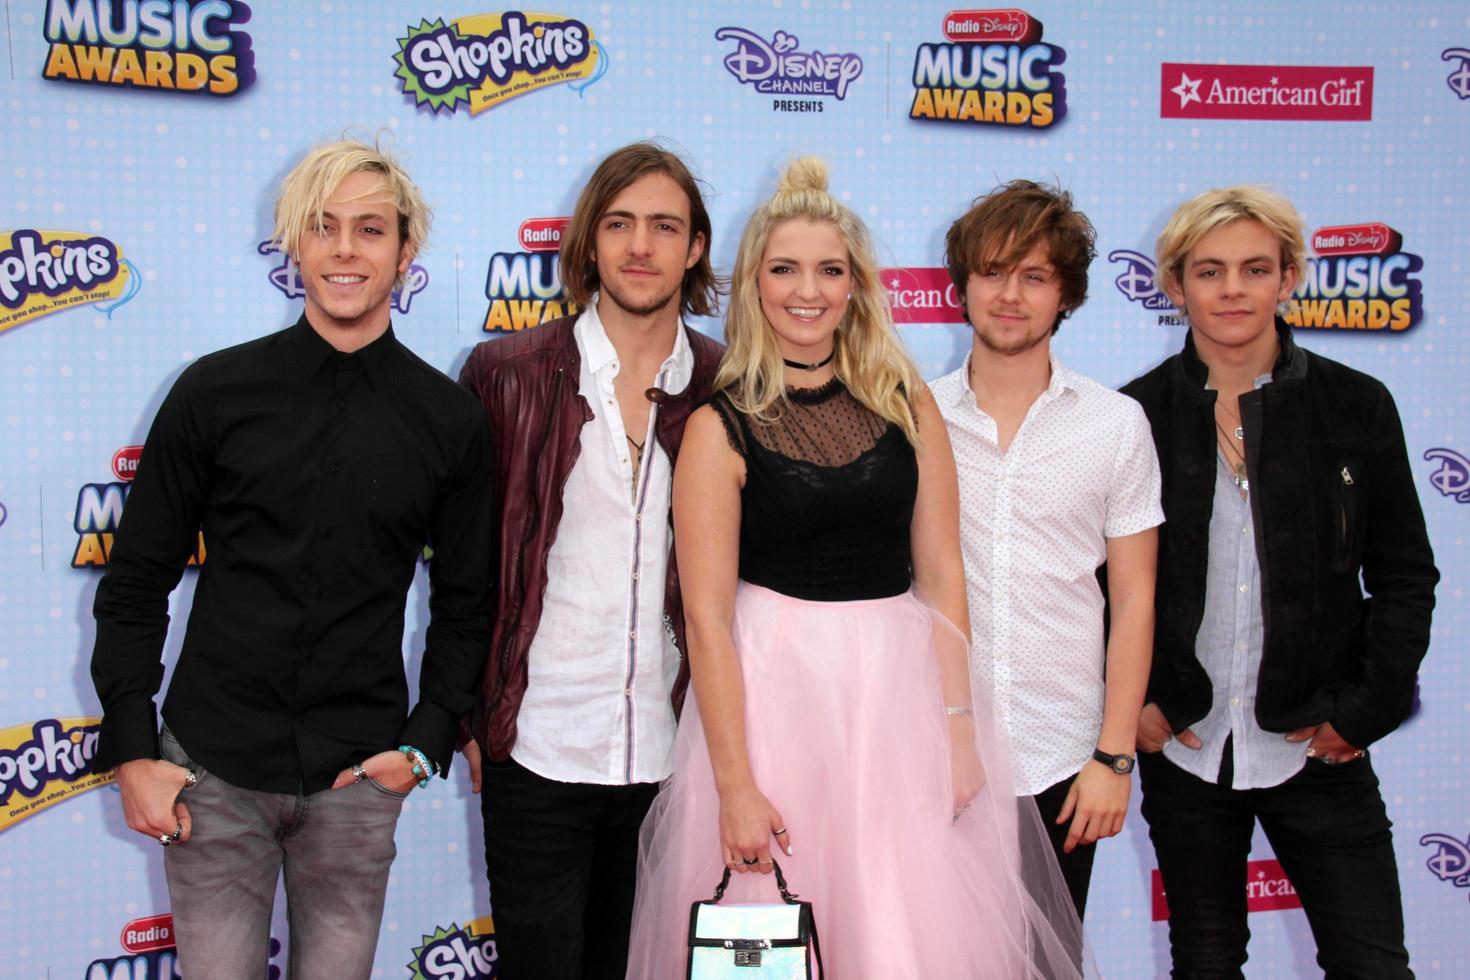 LOS ANGELES, FEB 25 - R5, Riley Lynch, Ross Lynch at the Radio DIsney Music Awards 2015 at the Nokia Theater on April 25, 2015 in Los Angeles, CA photo